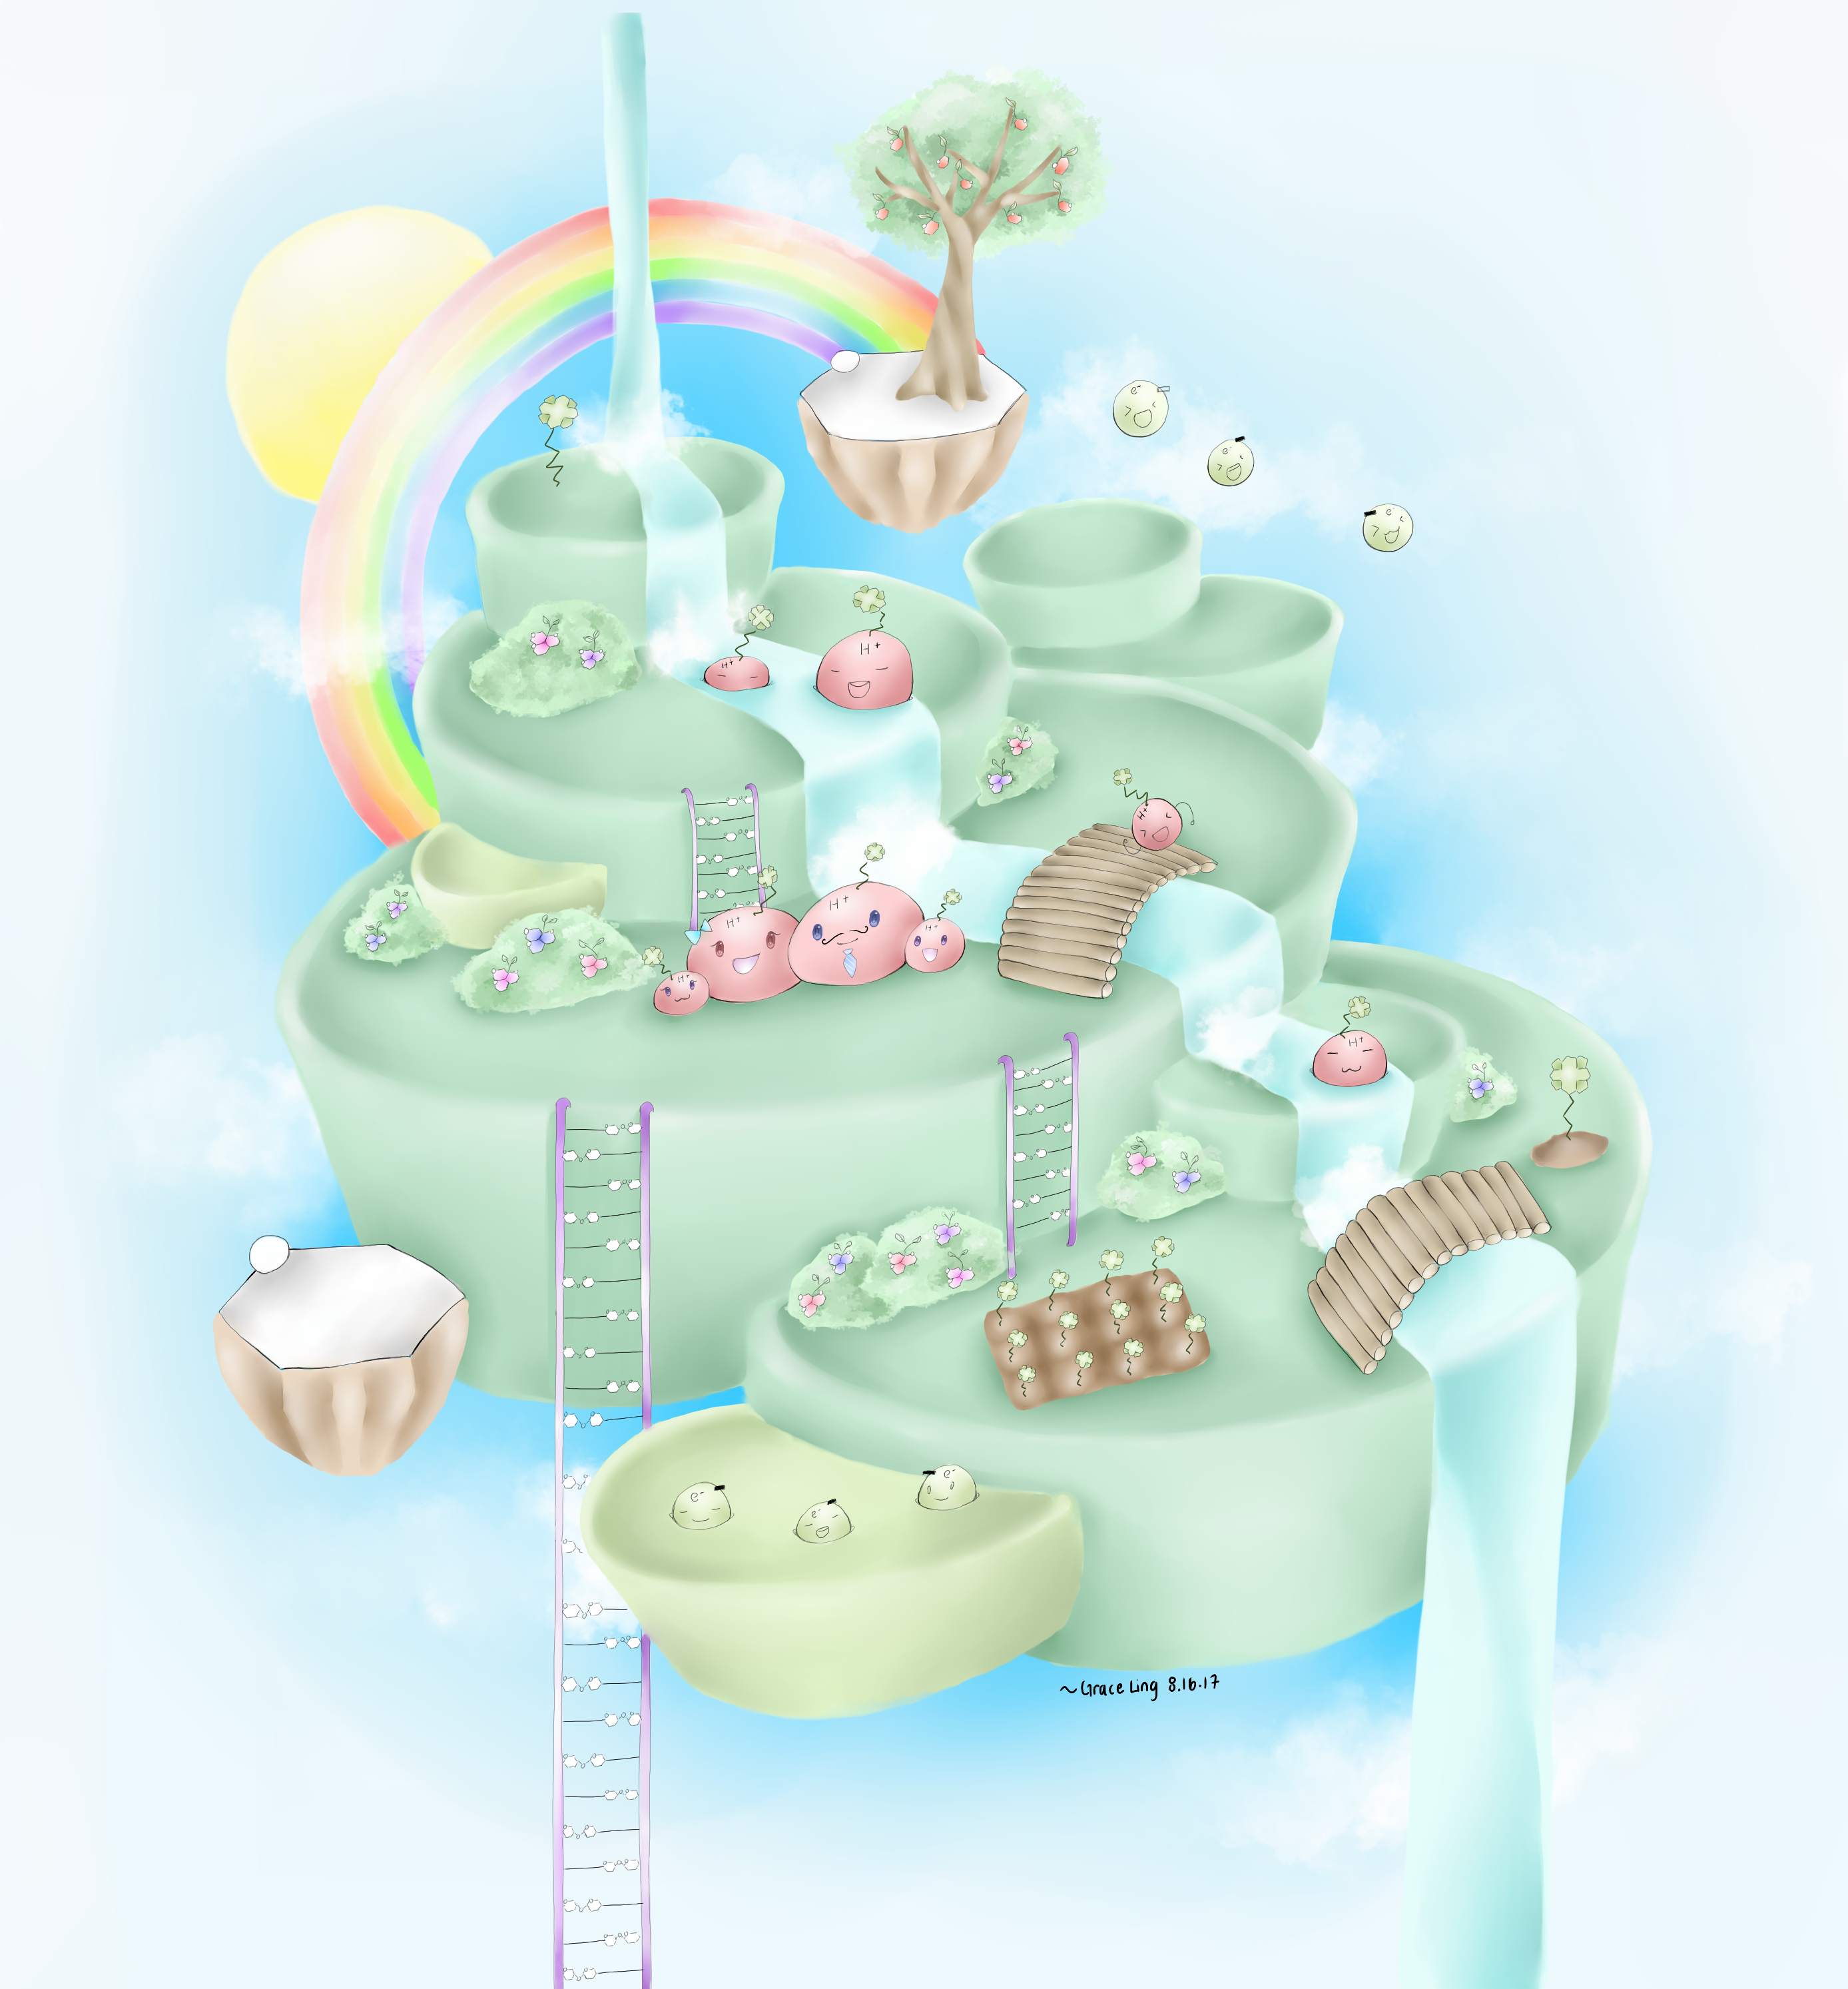 A multi-level illustrated island from the game Cell-fie